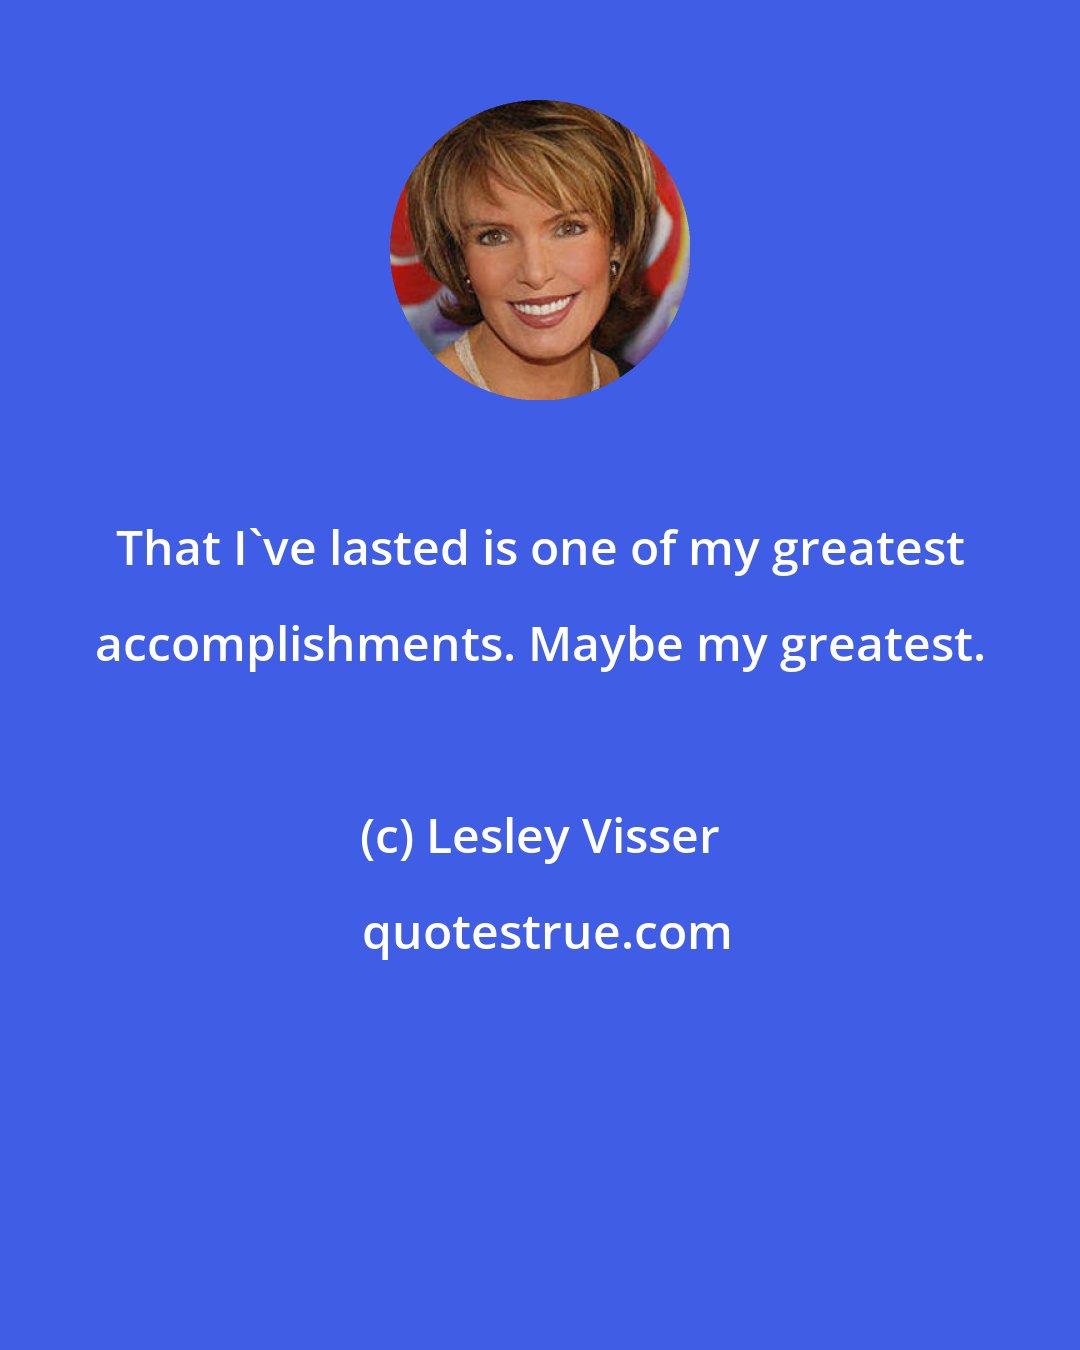 Lesley Visser: That I've lasted is one of my greatest accomplishments. Maybe my greatest.